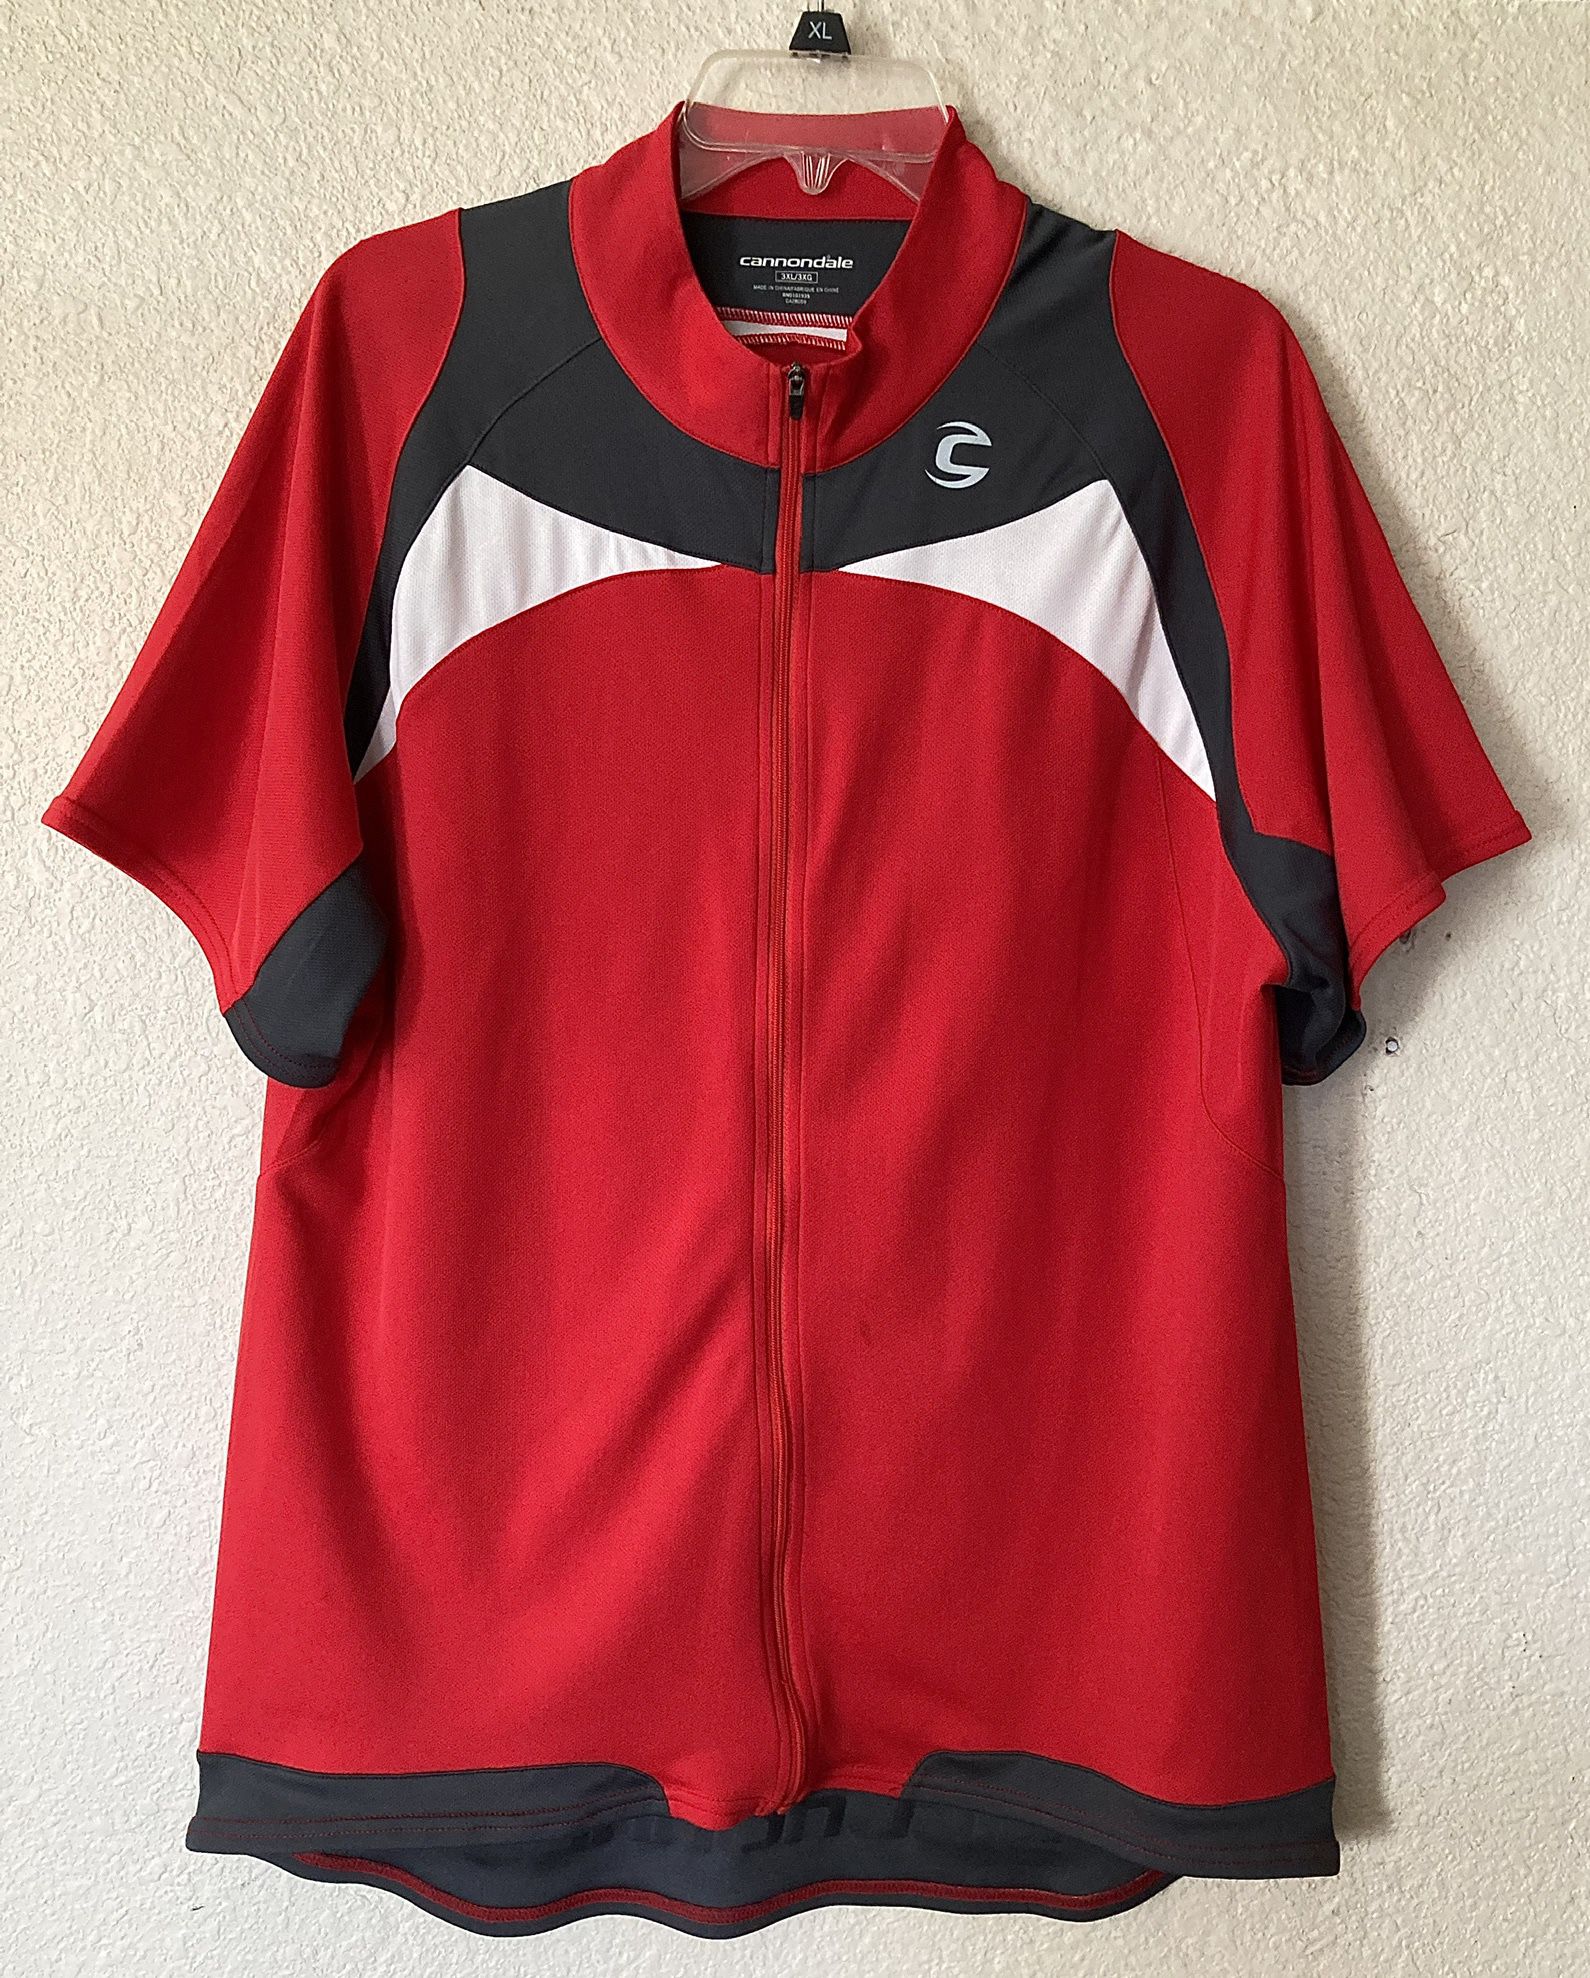 MENS CANNONDALE CYCLING JERSEY